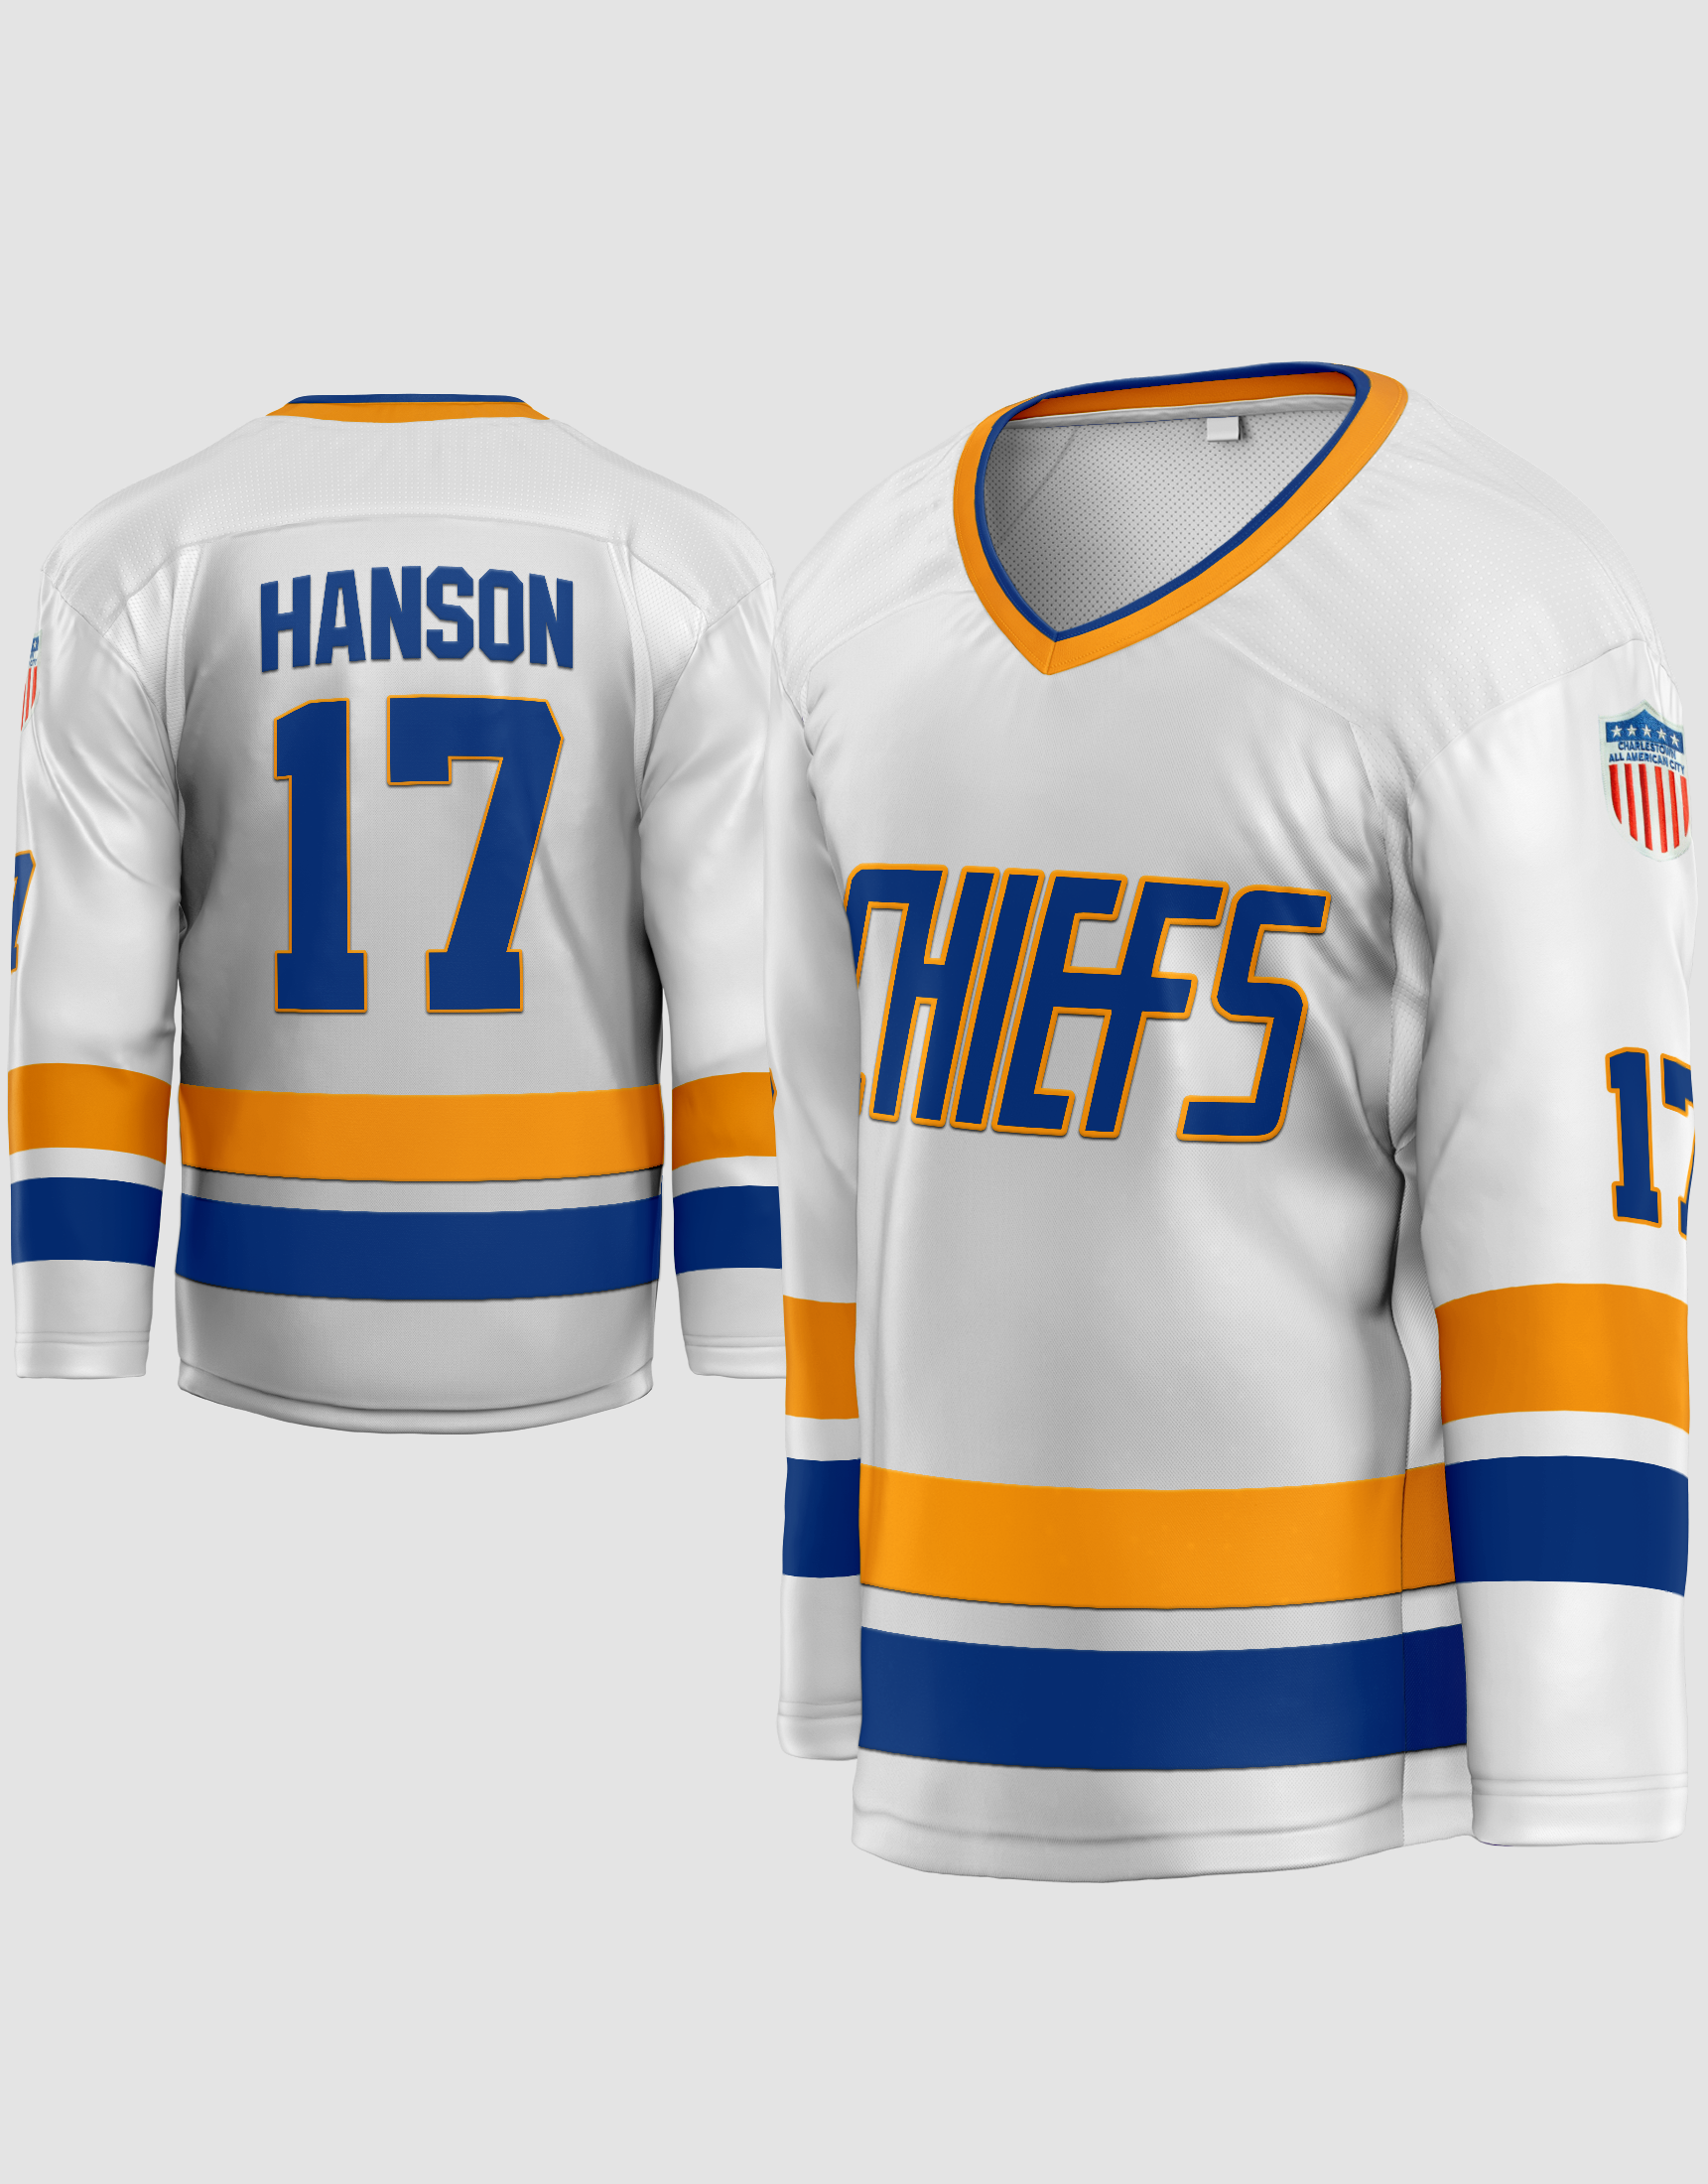 WUJIAJIA Micjersey Hanson Brothers Steve #17 Charlestown Chiefs Men Ice Hockey Jersey Breathable Long Sleeve T-shirt Stitched Letters Numbers 